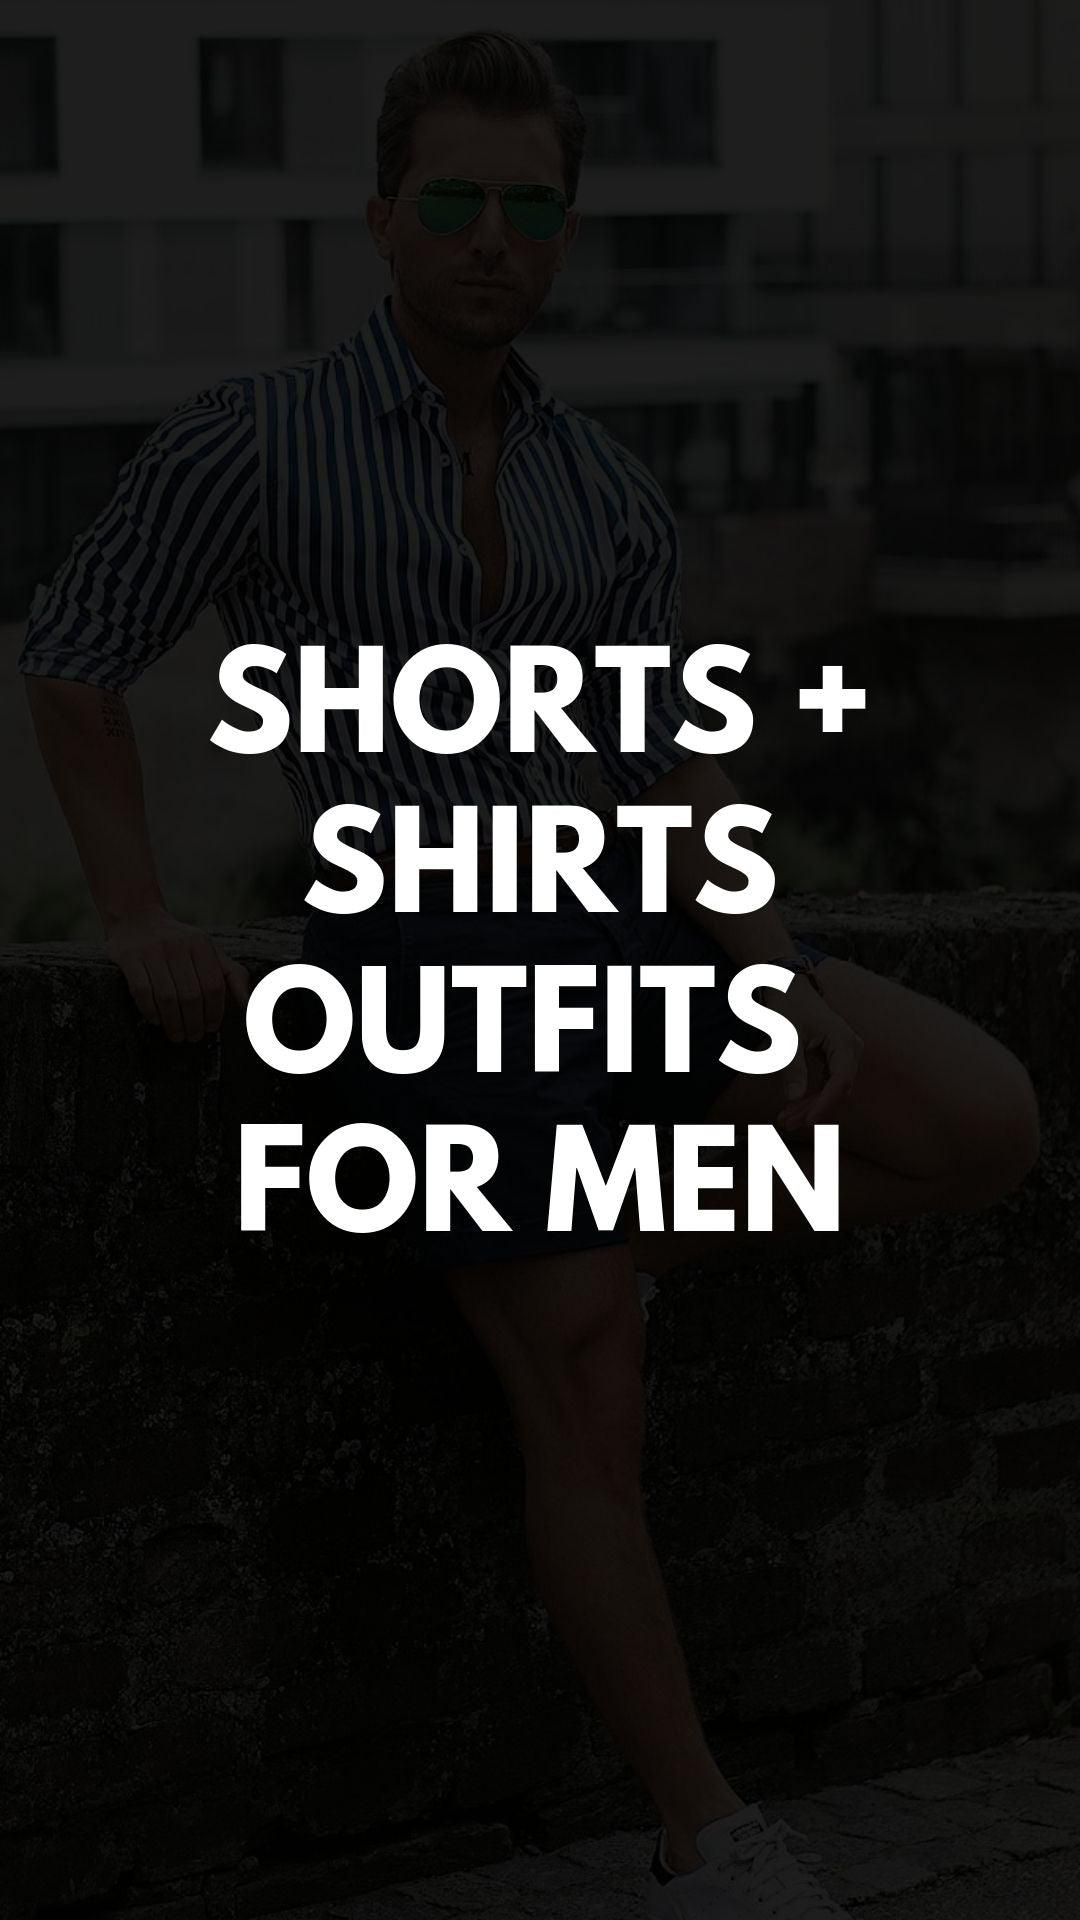 Shorts and shirt outfits for men